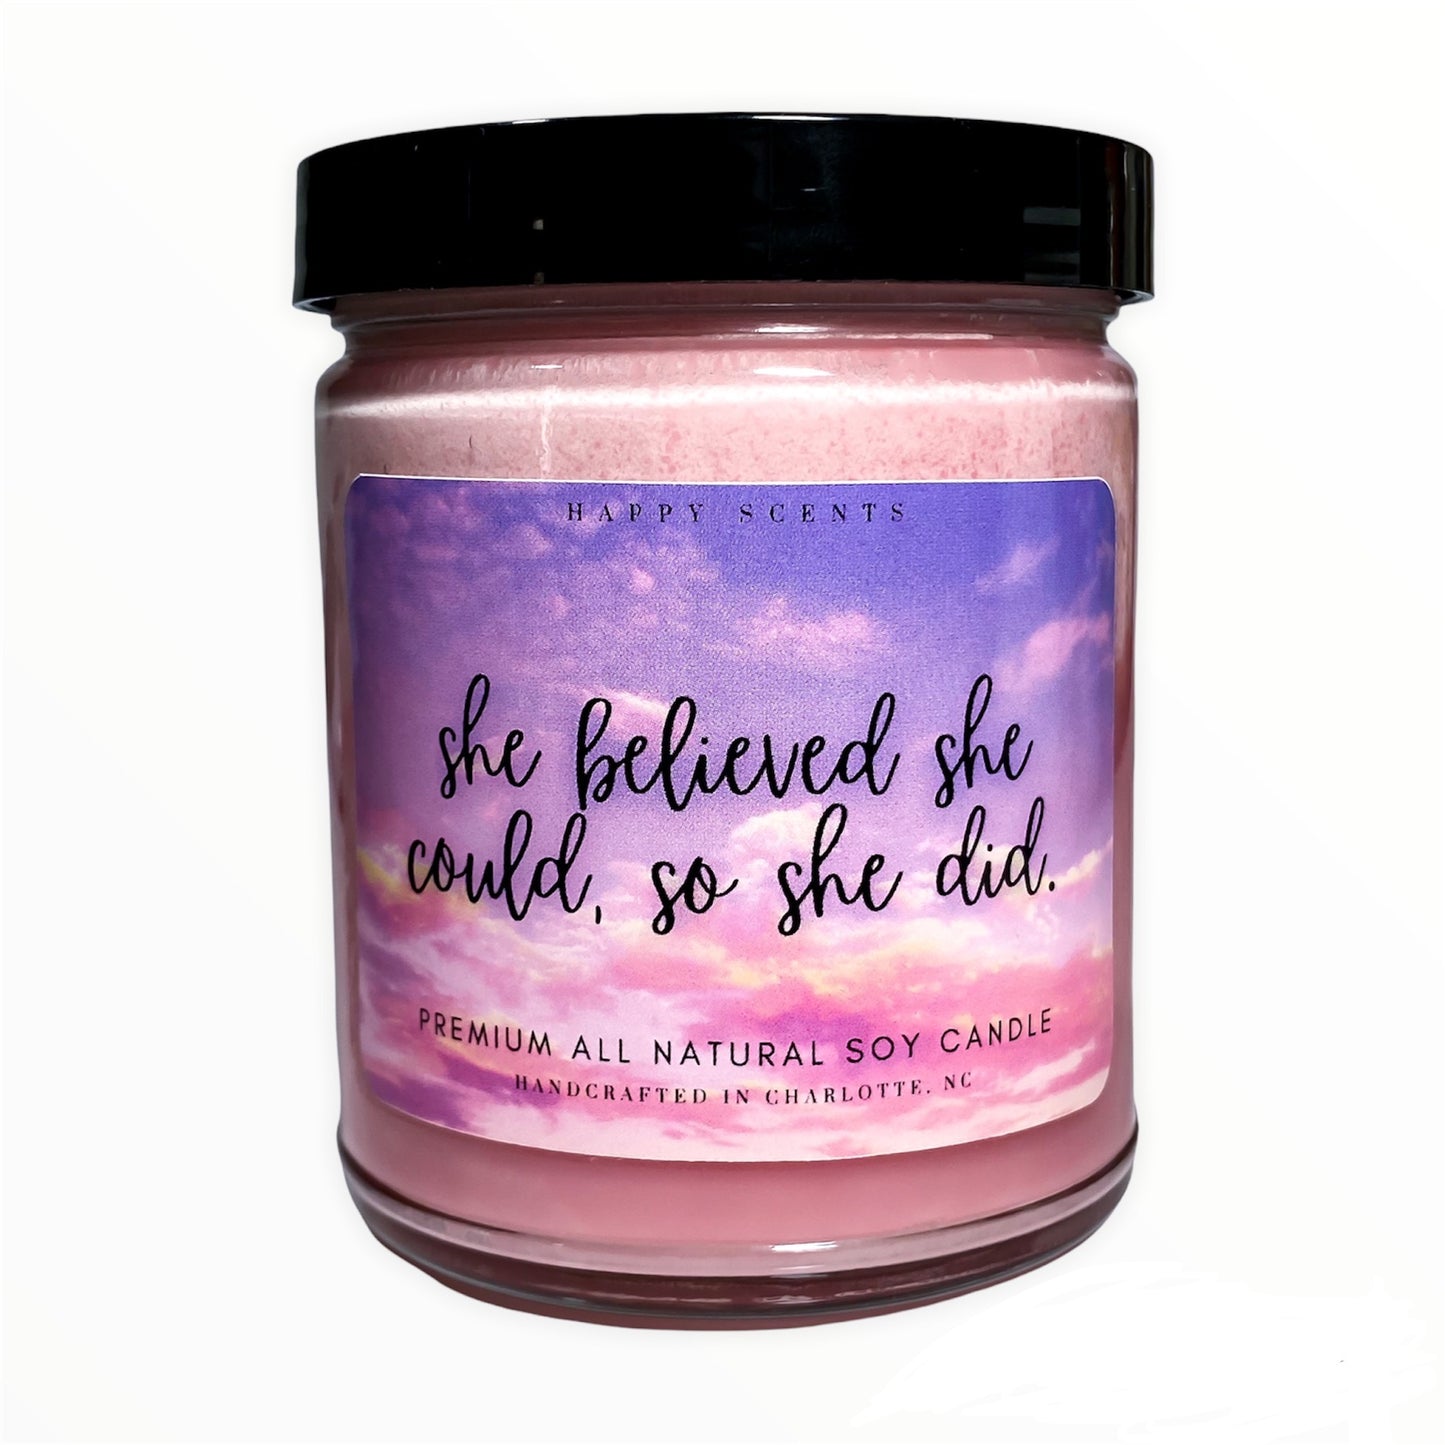 "She Believed She Could, so She Did" Quotable Jar Candle